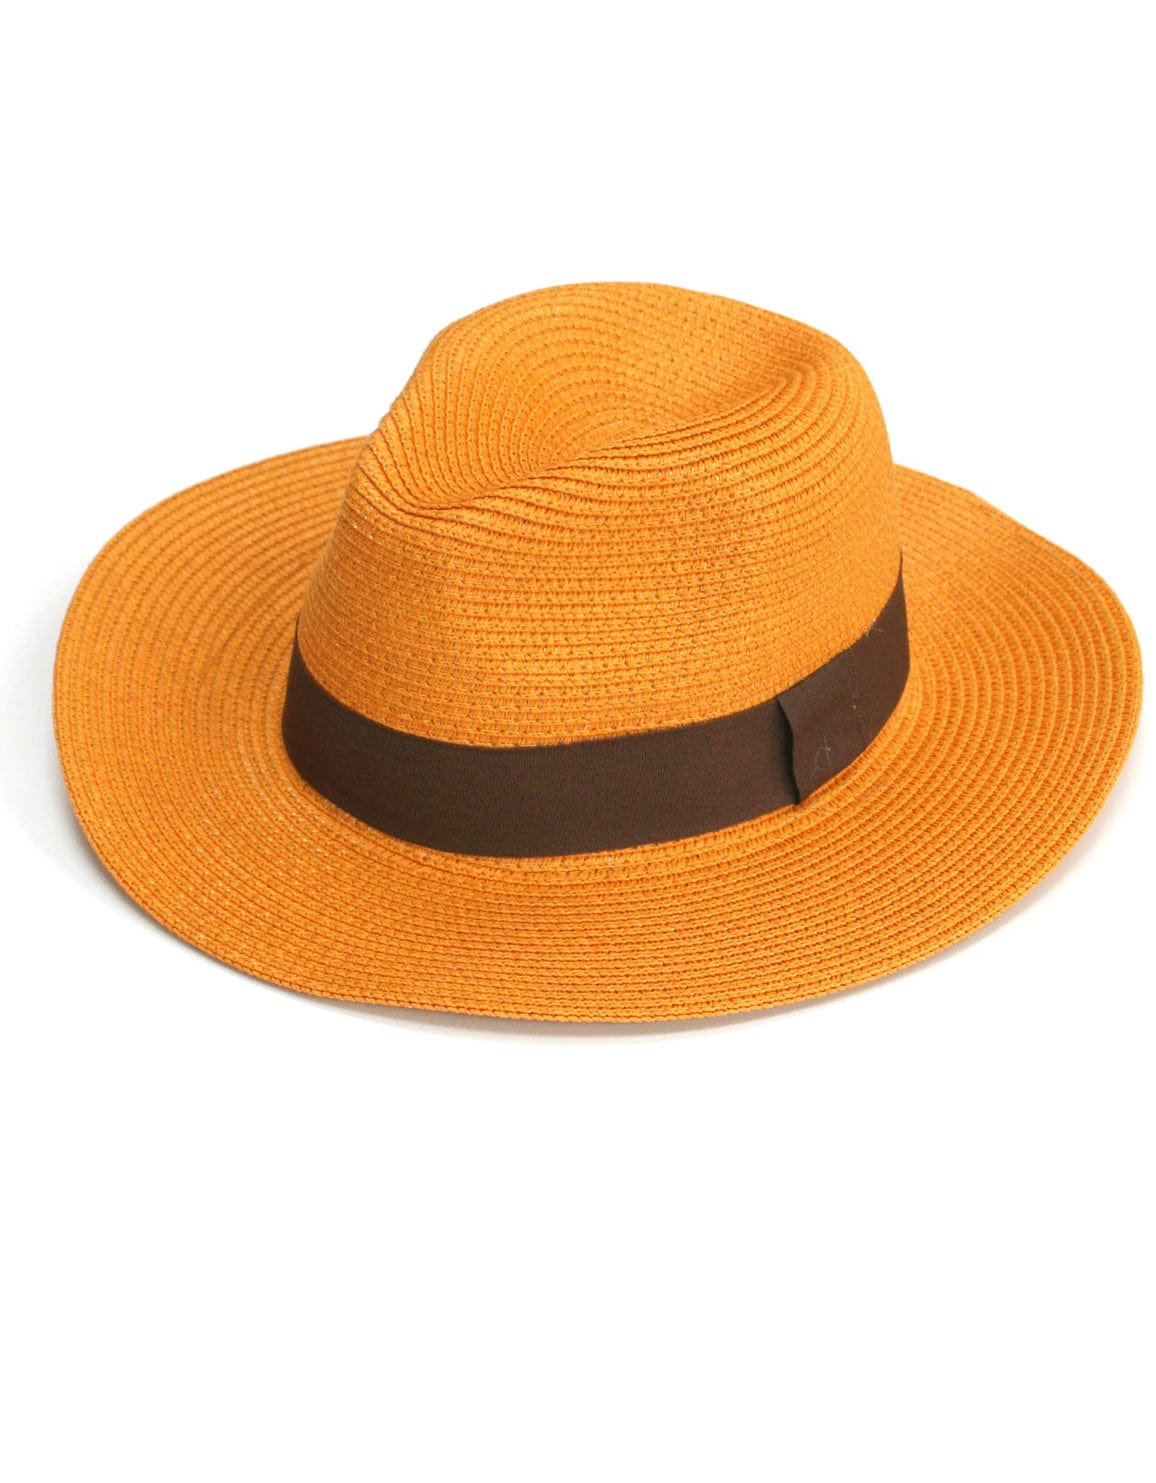 lusciousscarves Hats Mustard Yellow foldable Panama hat , Rollable , packable Sun hat